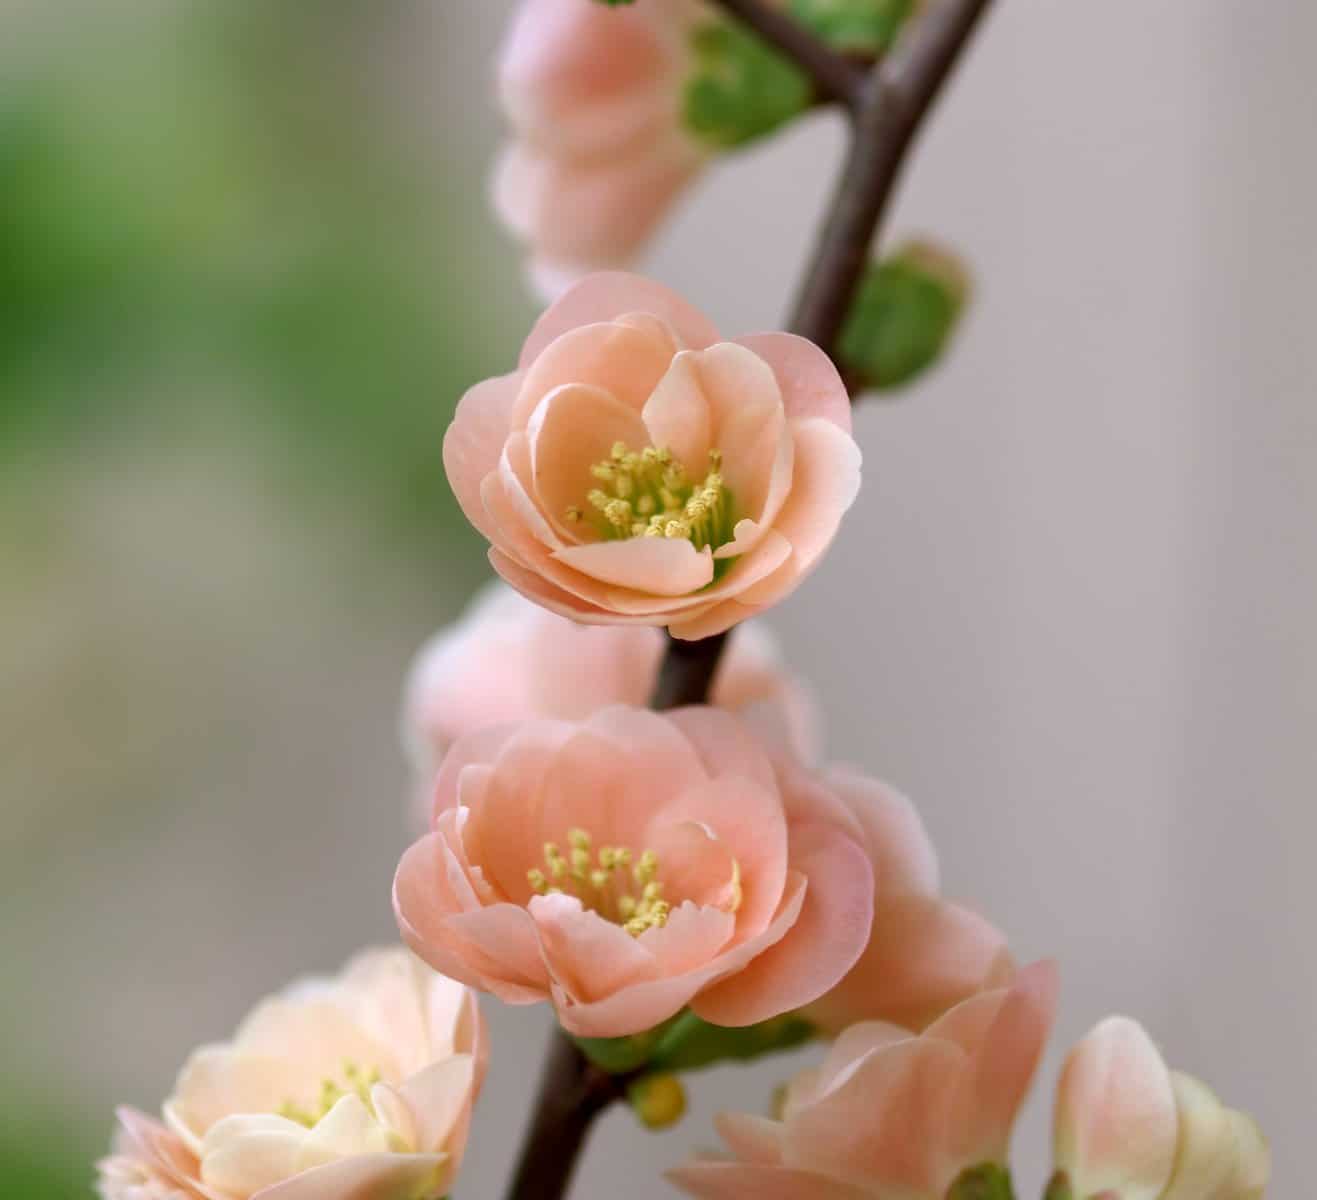 Peach flowers on a branch with green leaves.